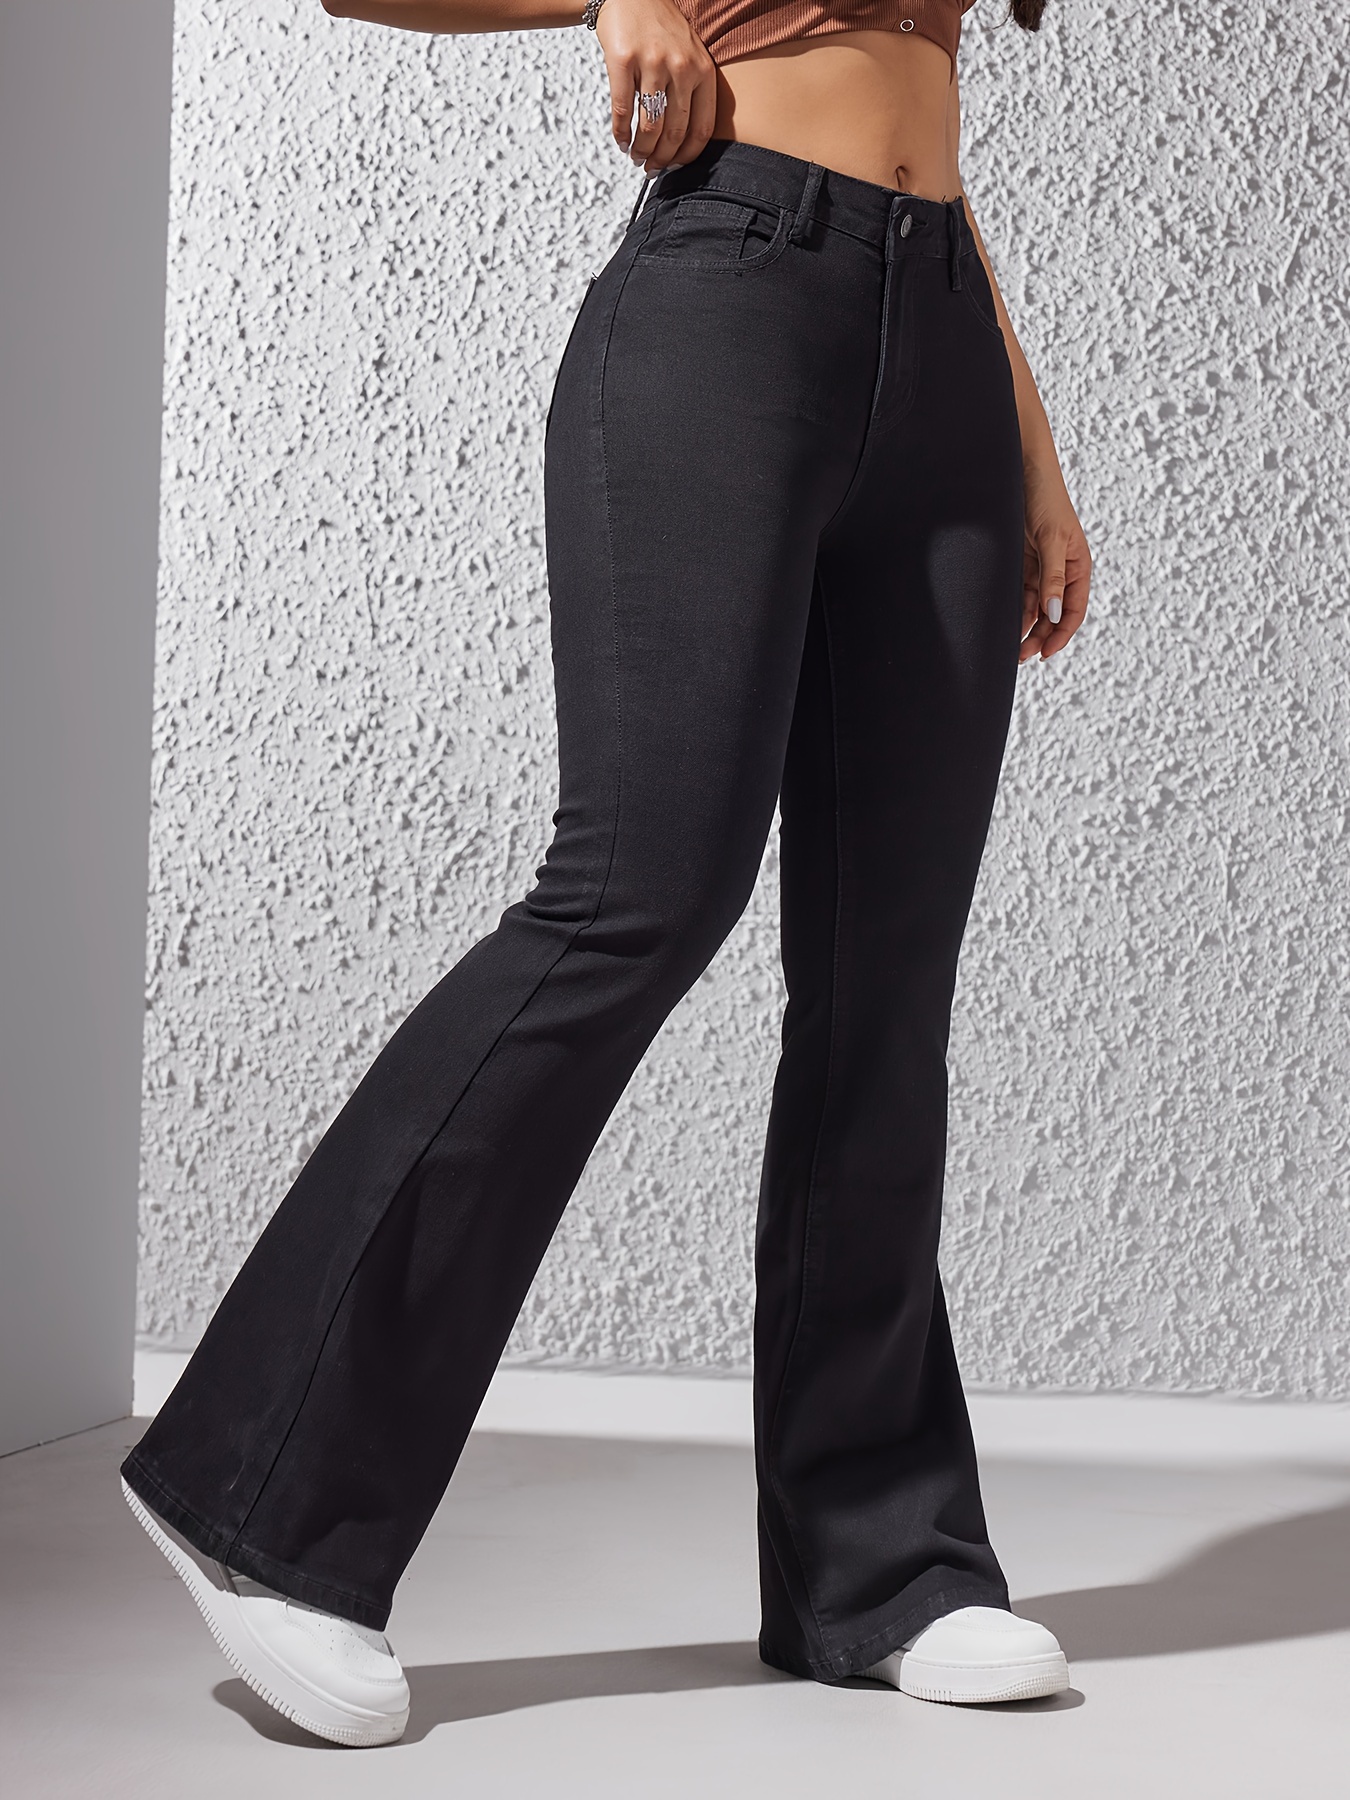 Black High Waist Flare Jeans * Stretch Slim Fit High * Bell Bottom Jeans,  Women's Denim Jeans & Clothing